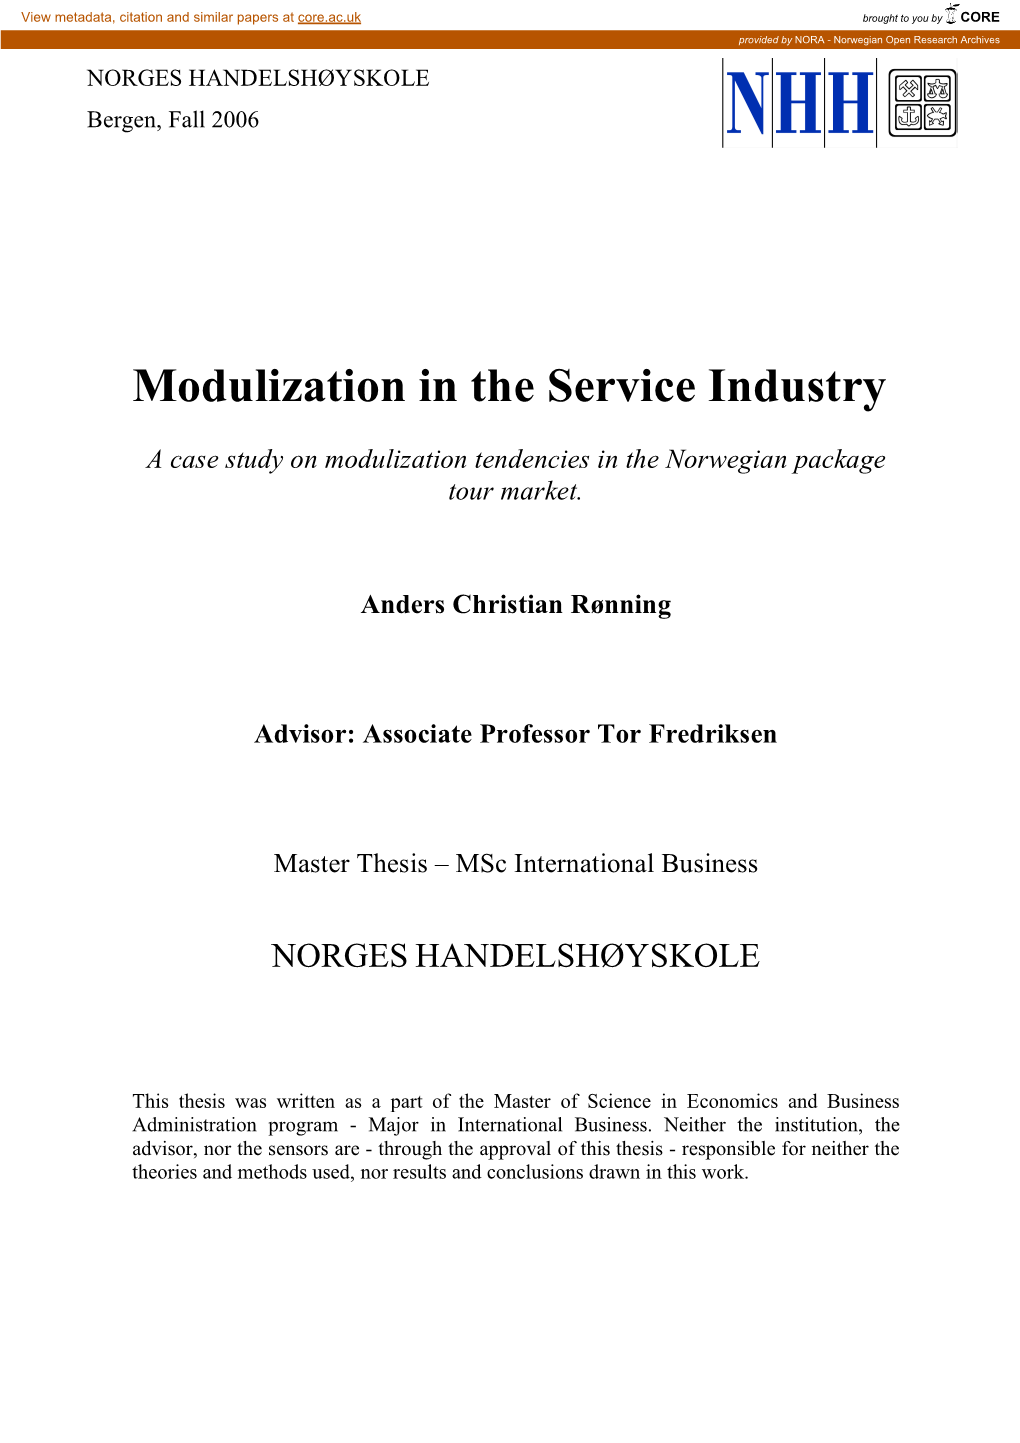 Modulization in the Service Industry